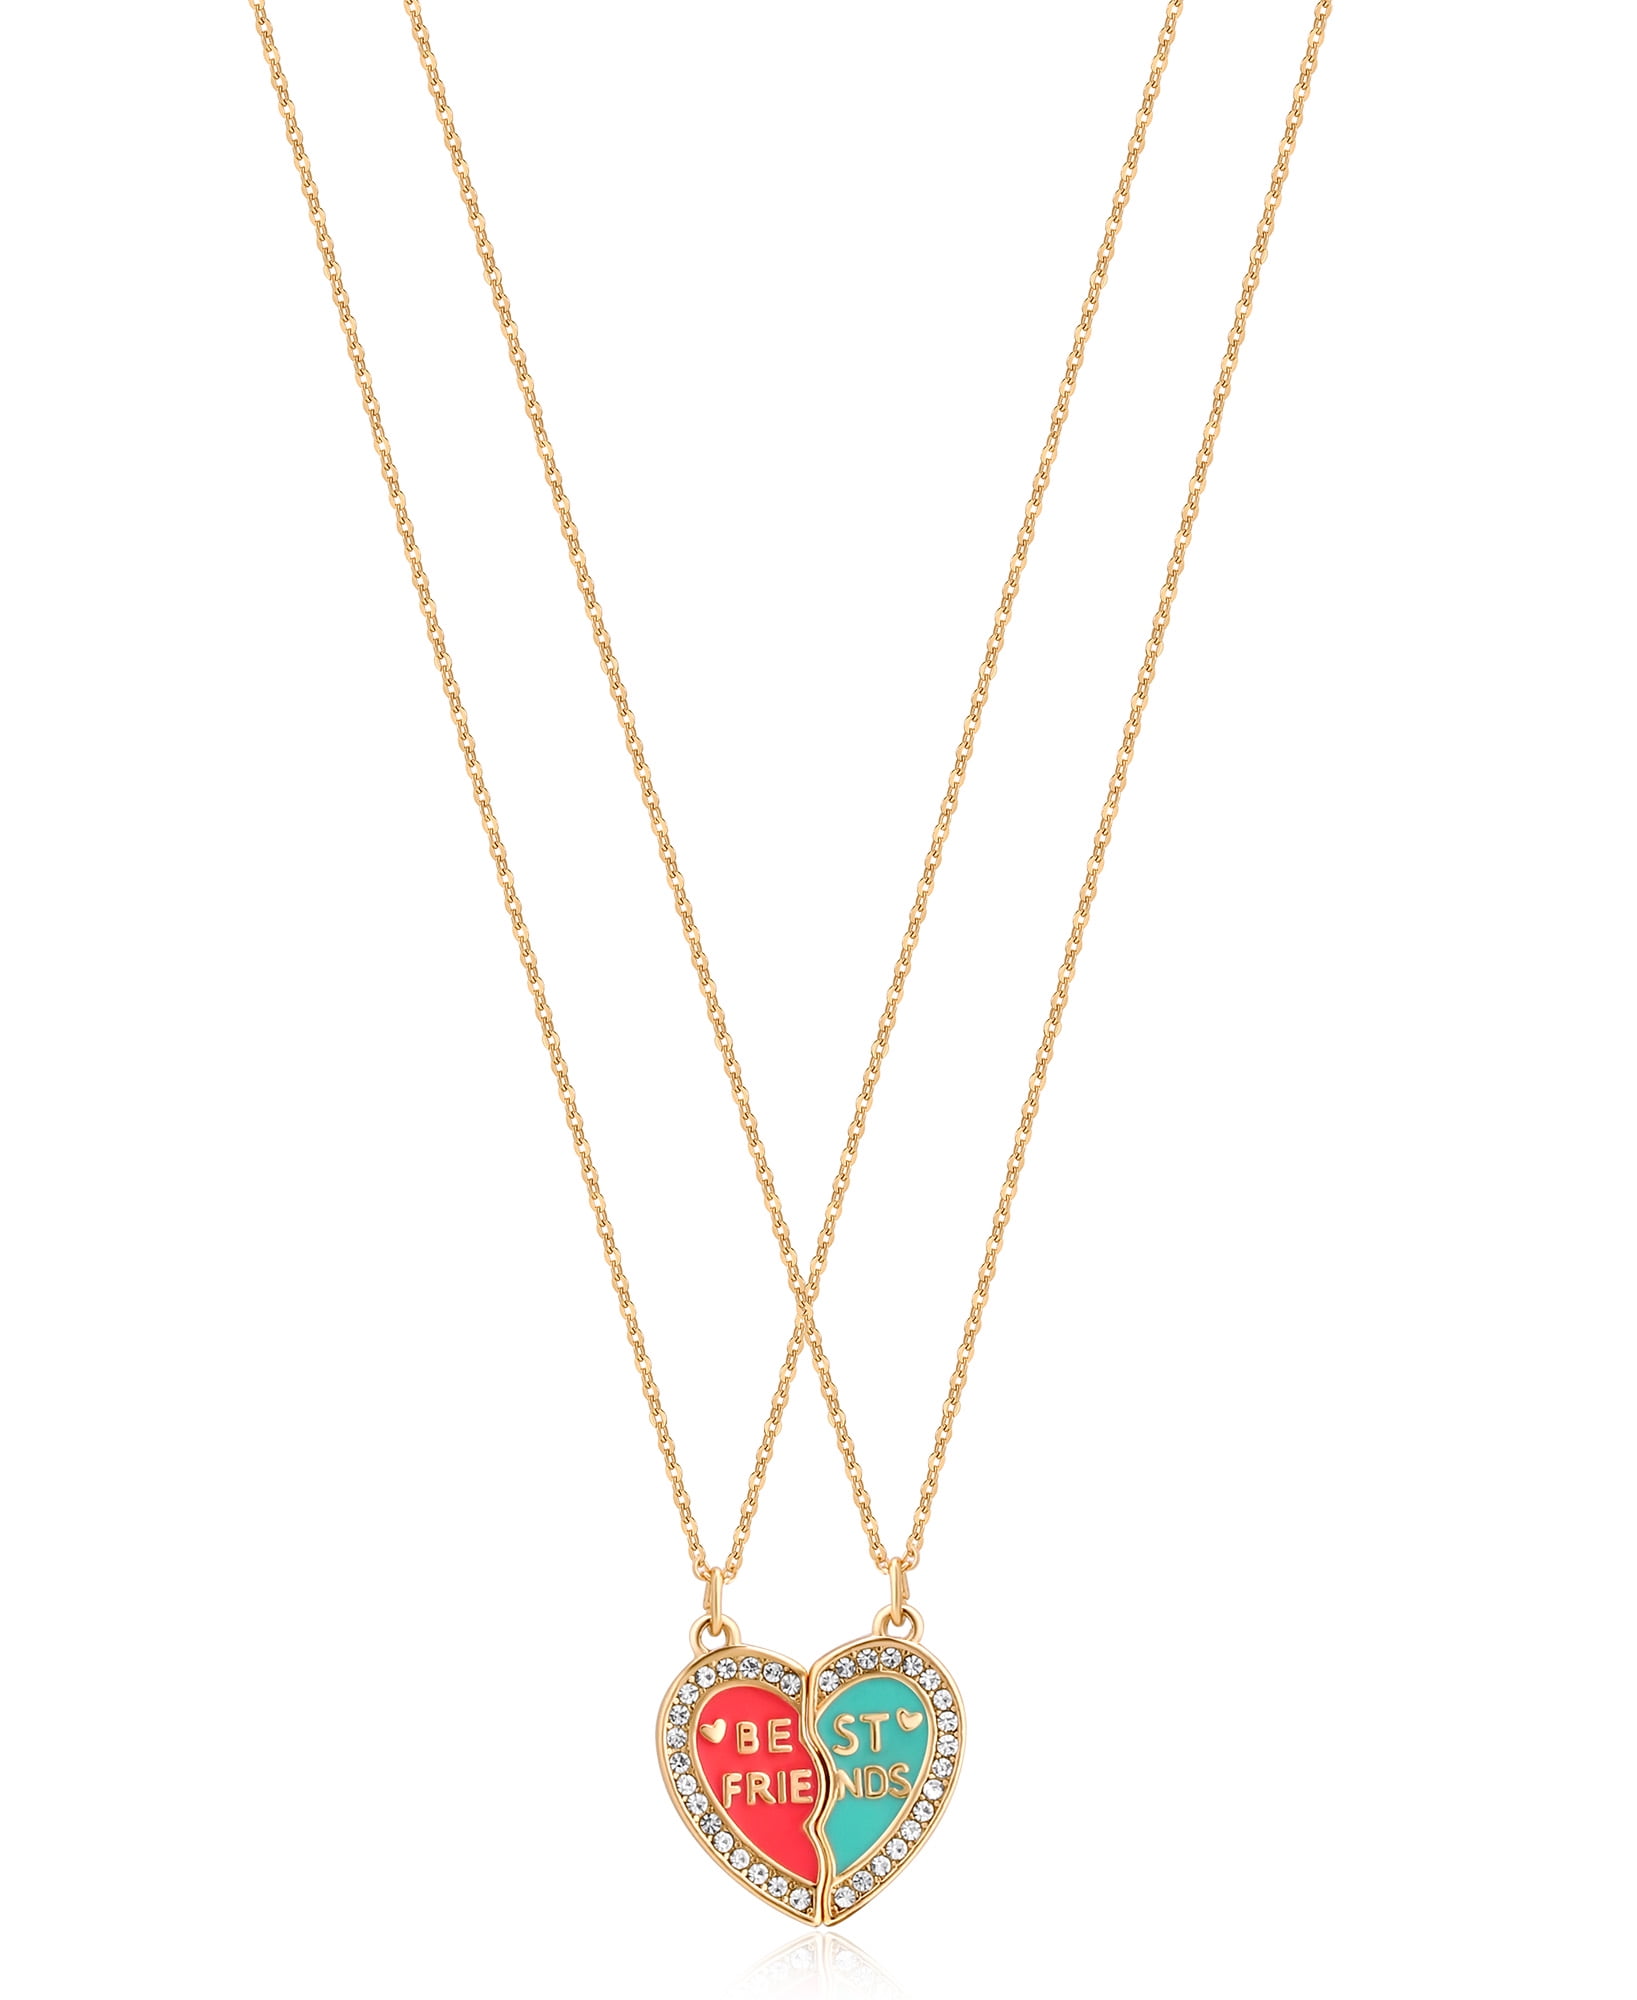 Wonder Nation Girl's "BFF" Multicolored Enameled Magnetic Heart Friendship Necklaces.